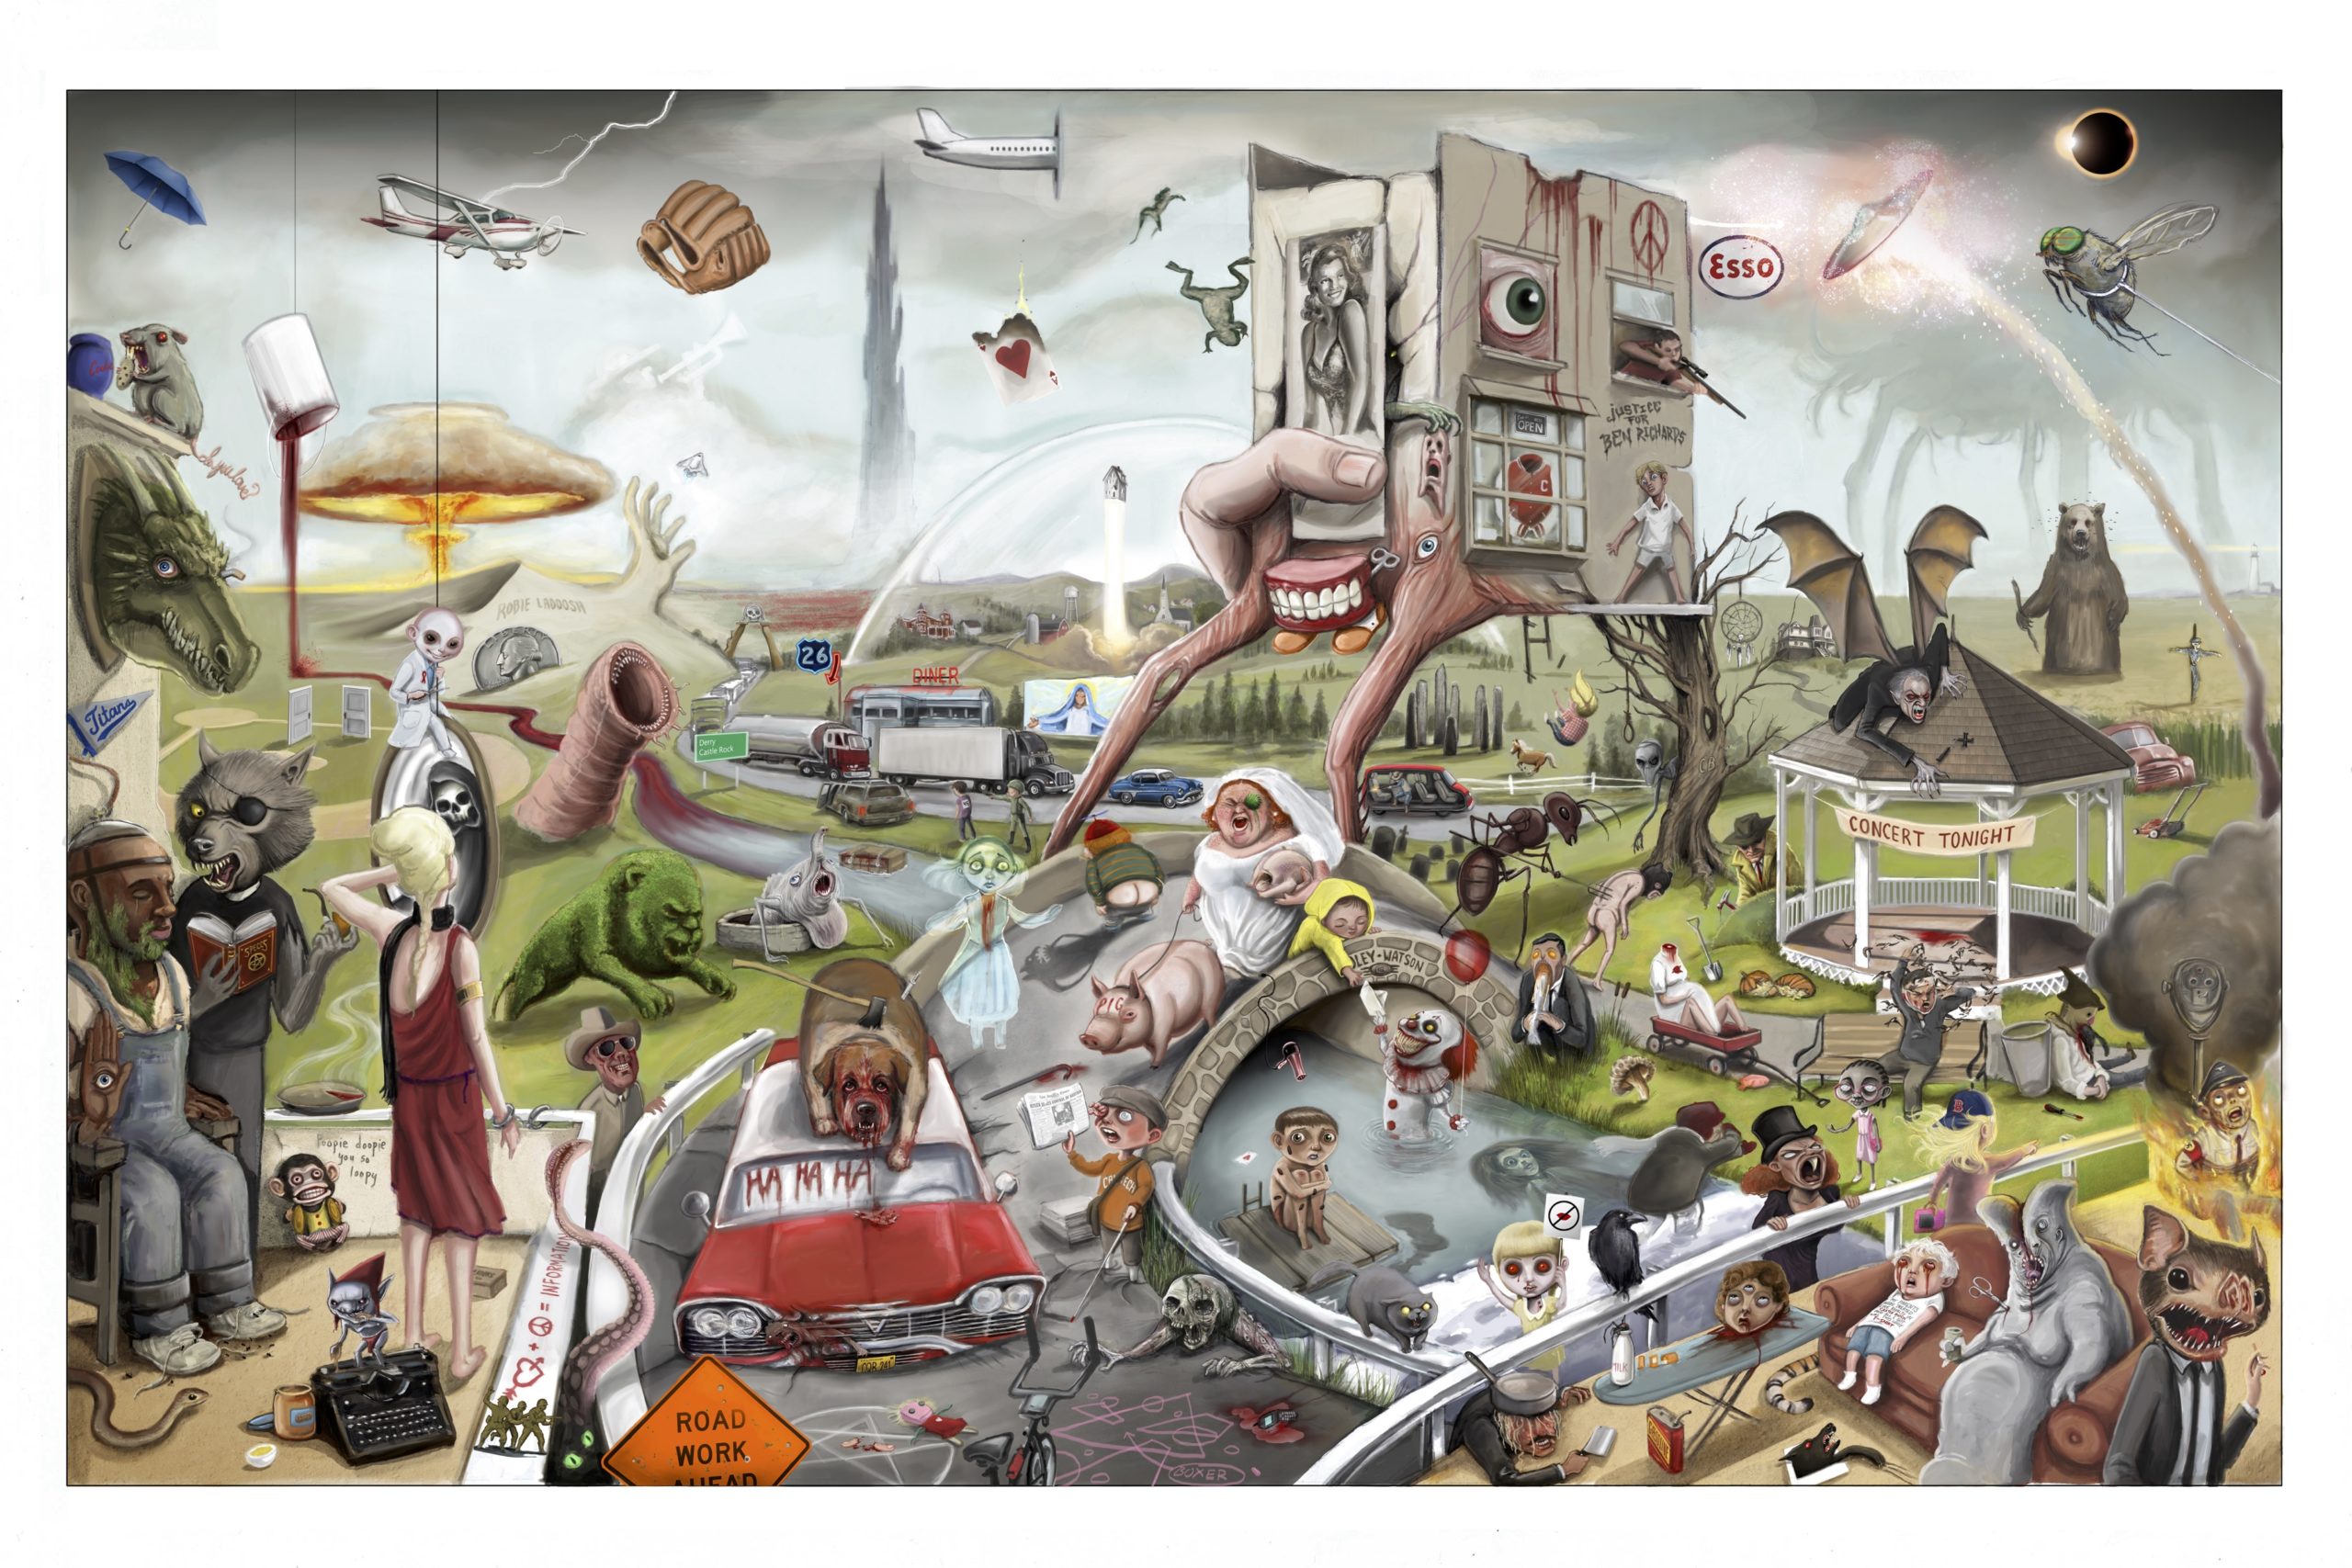 There Are Almost 200 Stephen King References On This Poster — Can You Name Them All?